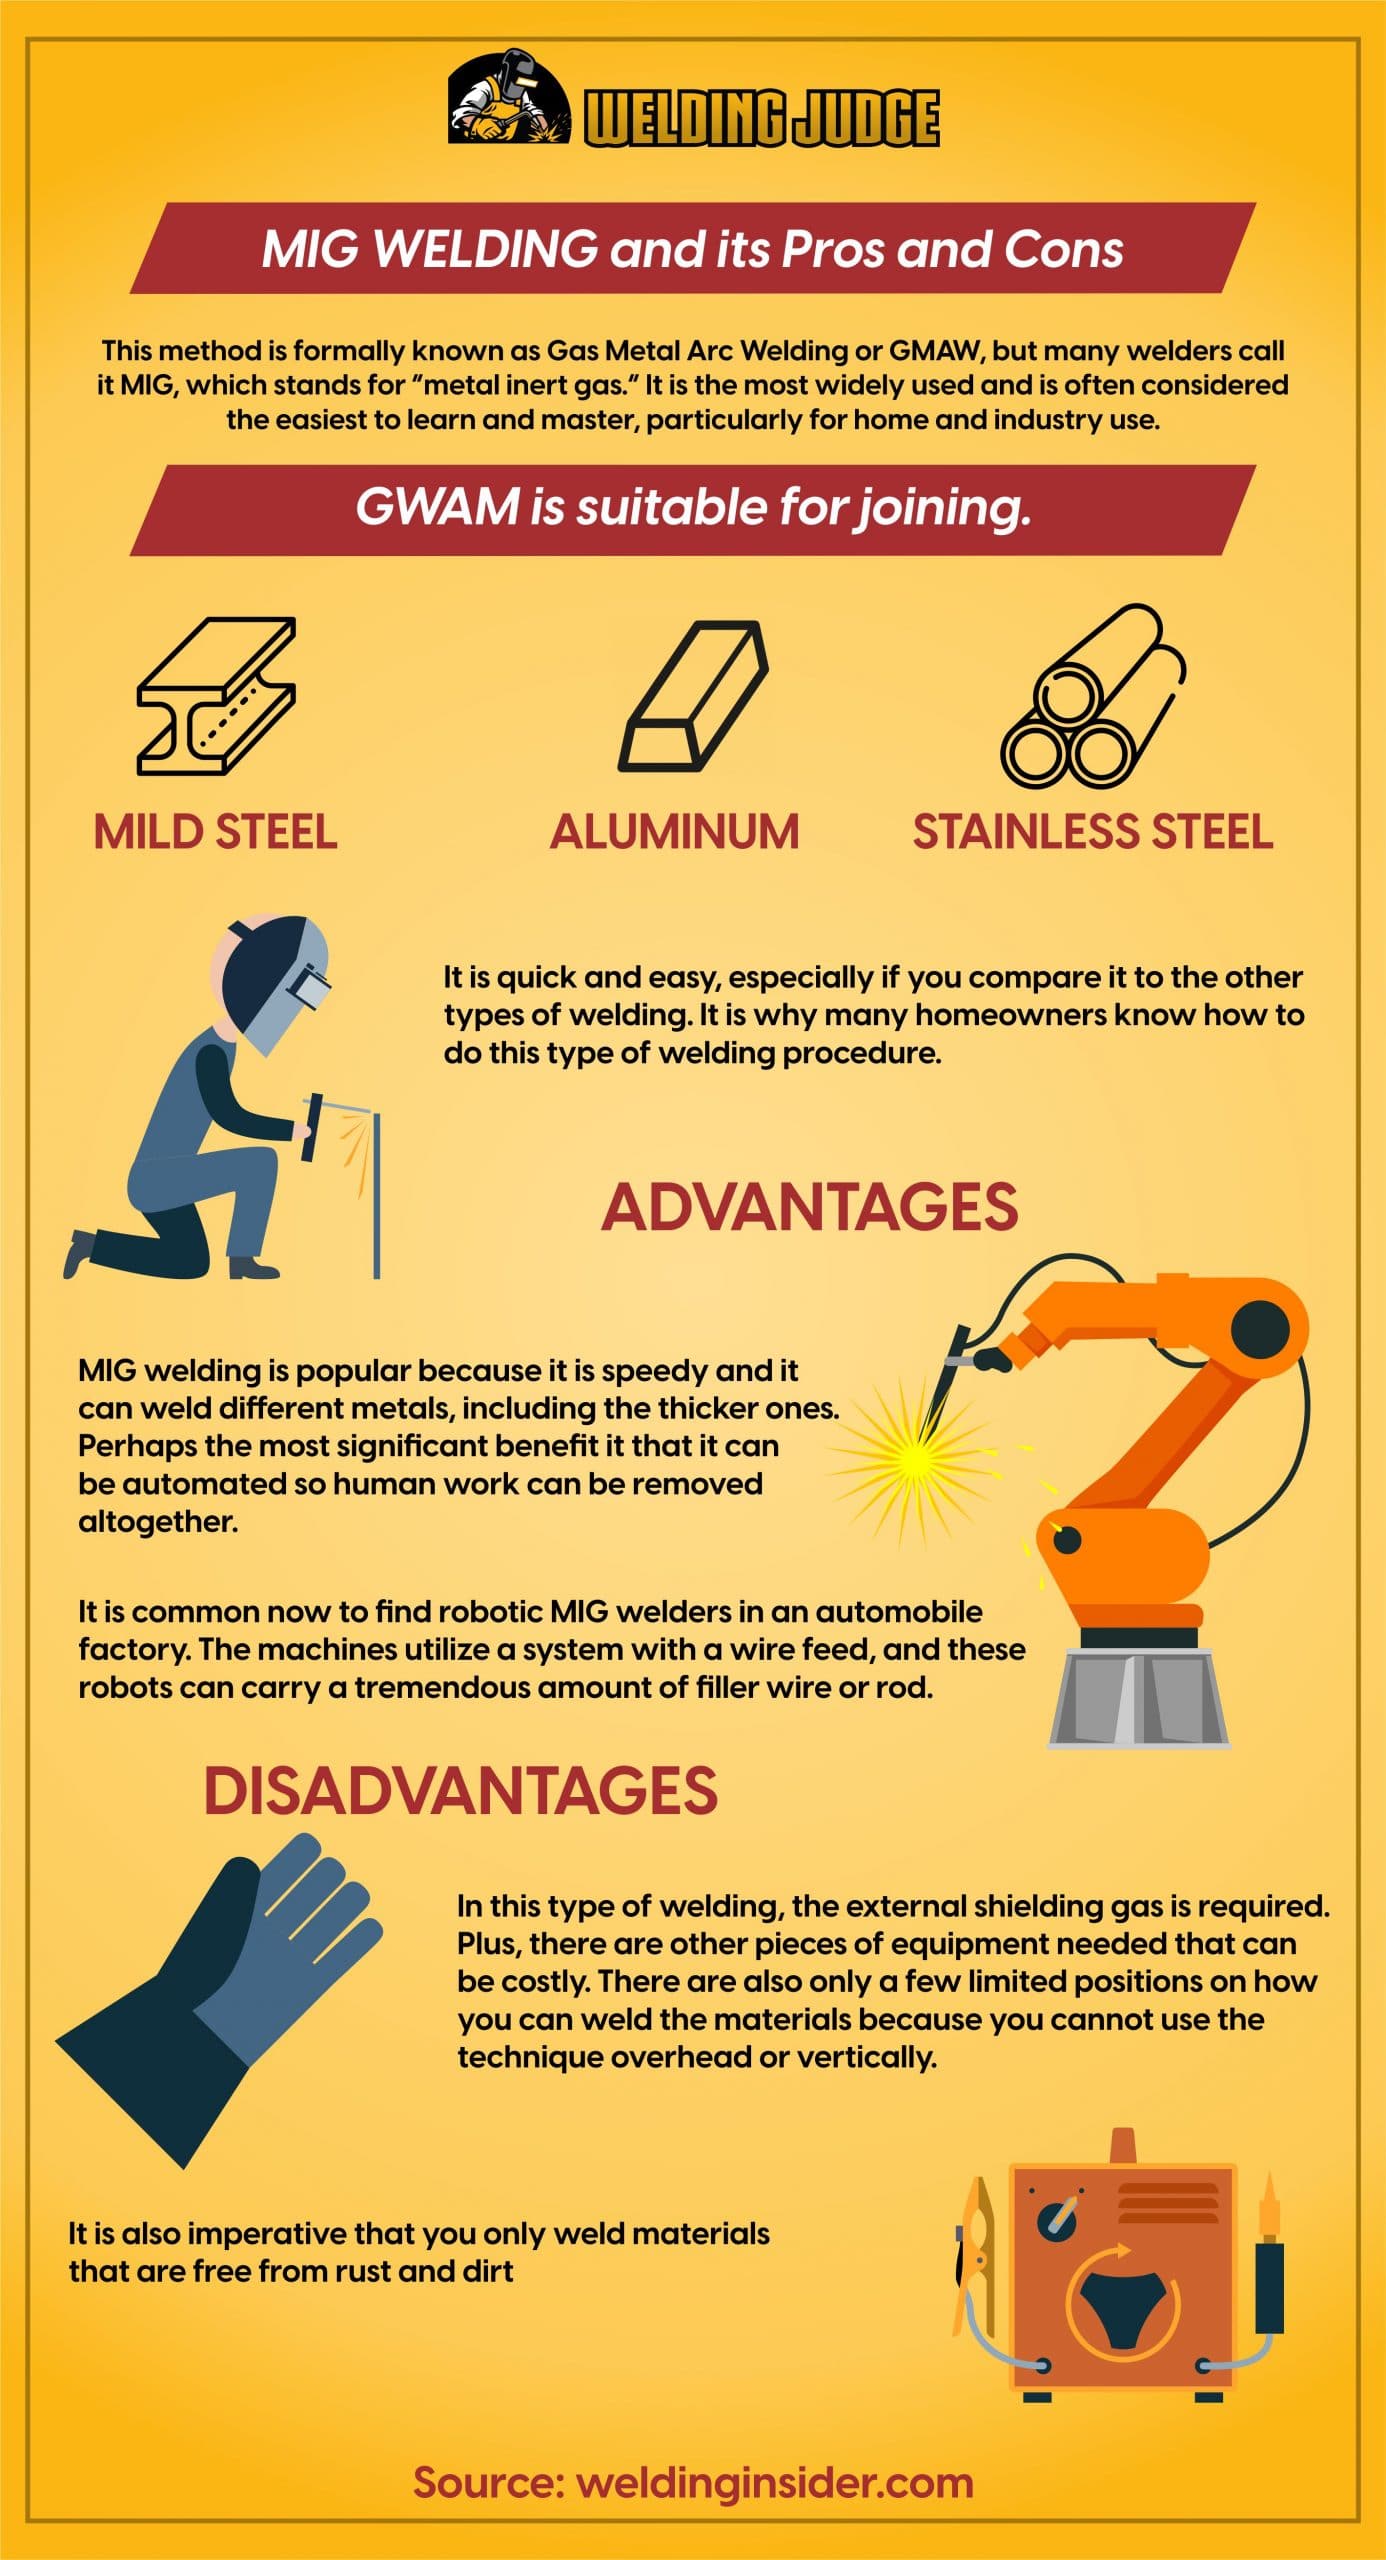 MIG Welding and its pros and cons